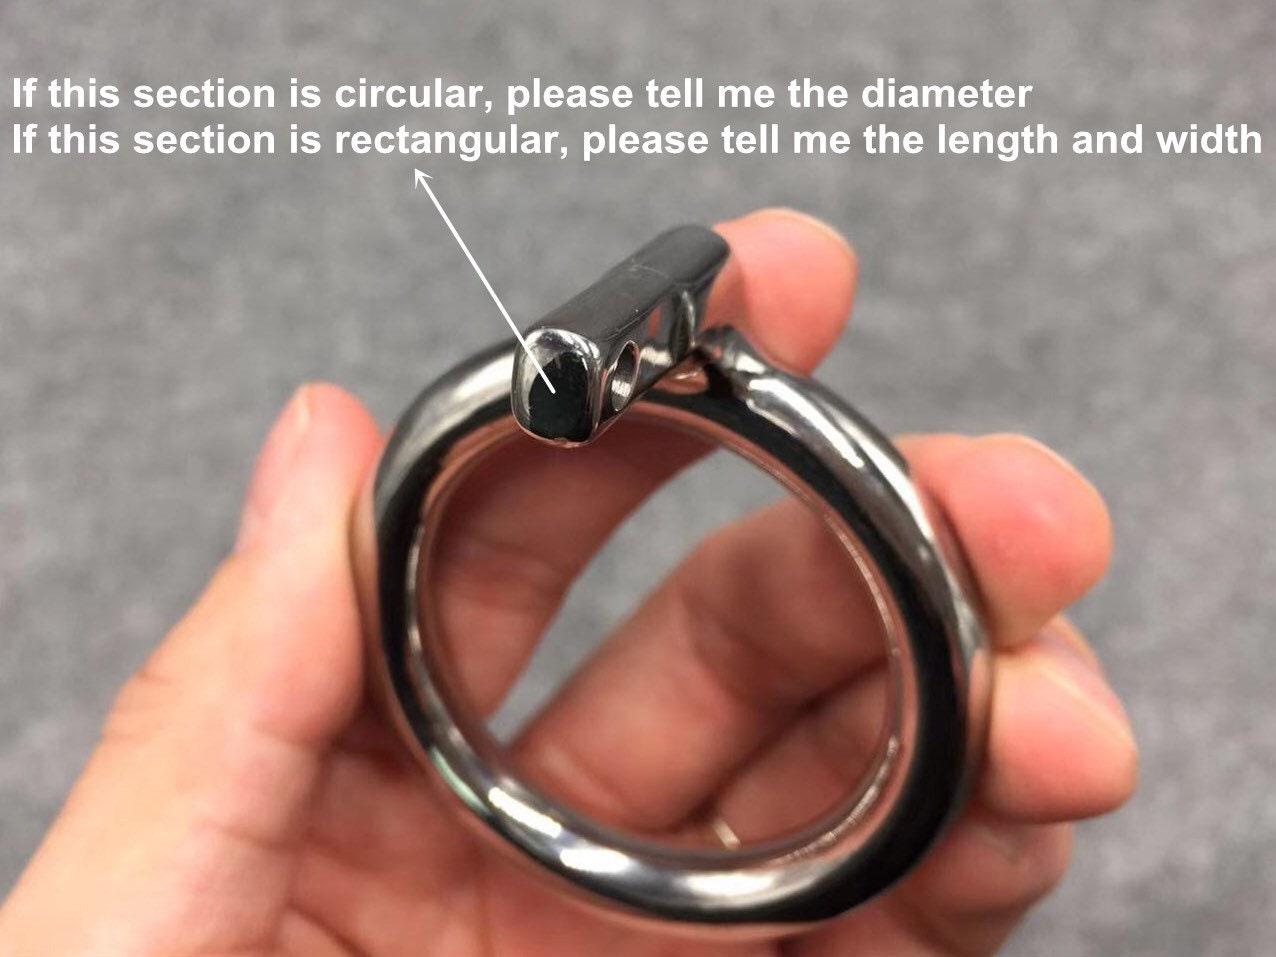 Customize Separate Base Ring for Chastity Cages Using Padlock | Etsy